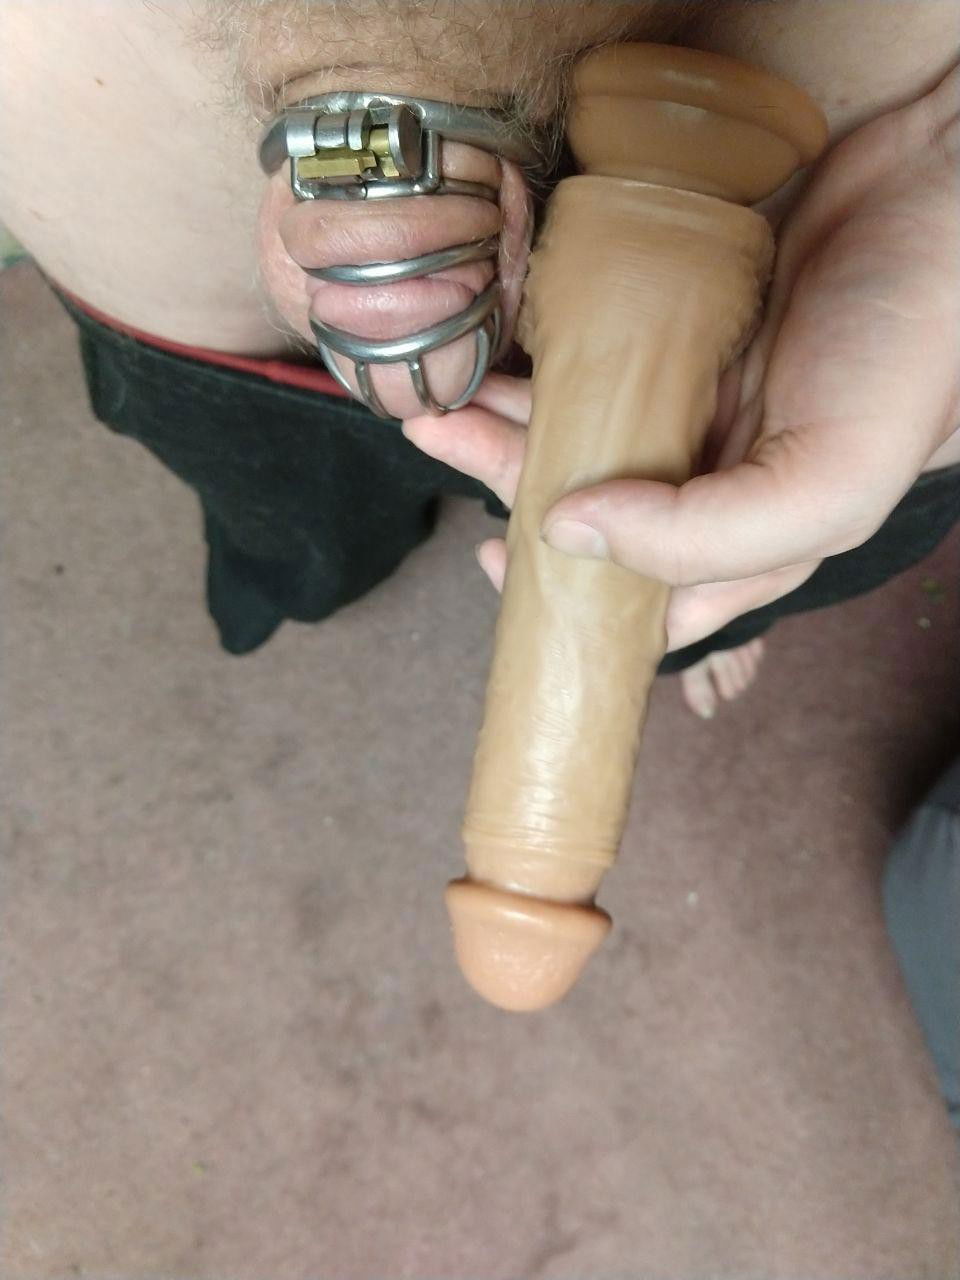 Photo by cdroxxy with the username @cdroxxy,  August 10, 2019 at 8:54 PM. The post is about the topic SPH Small Penis Humiliation and the text says '1/3 the size of this toy'